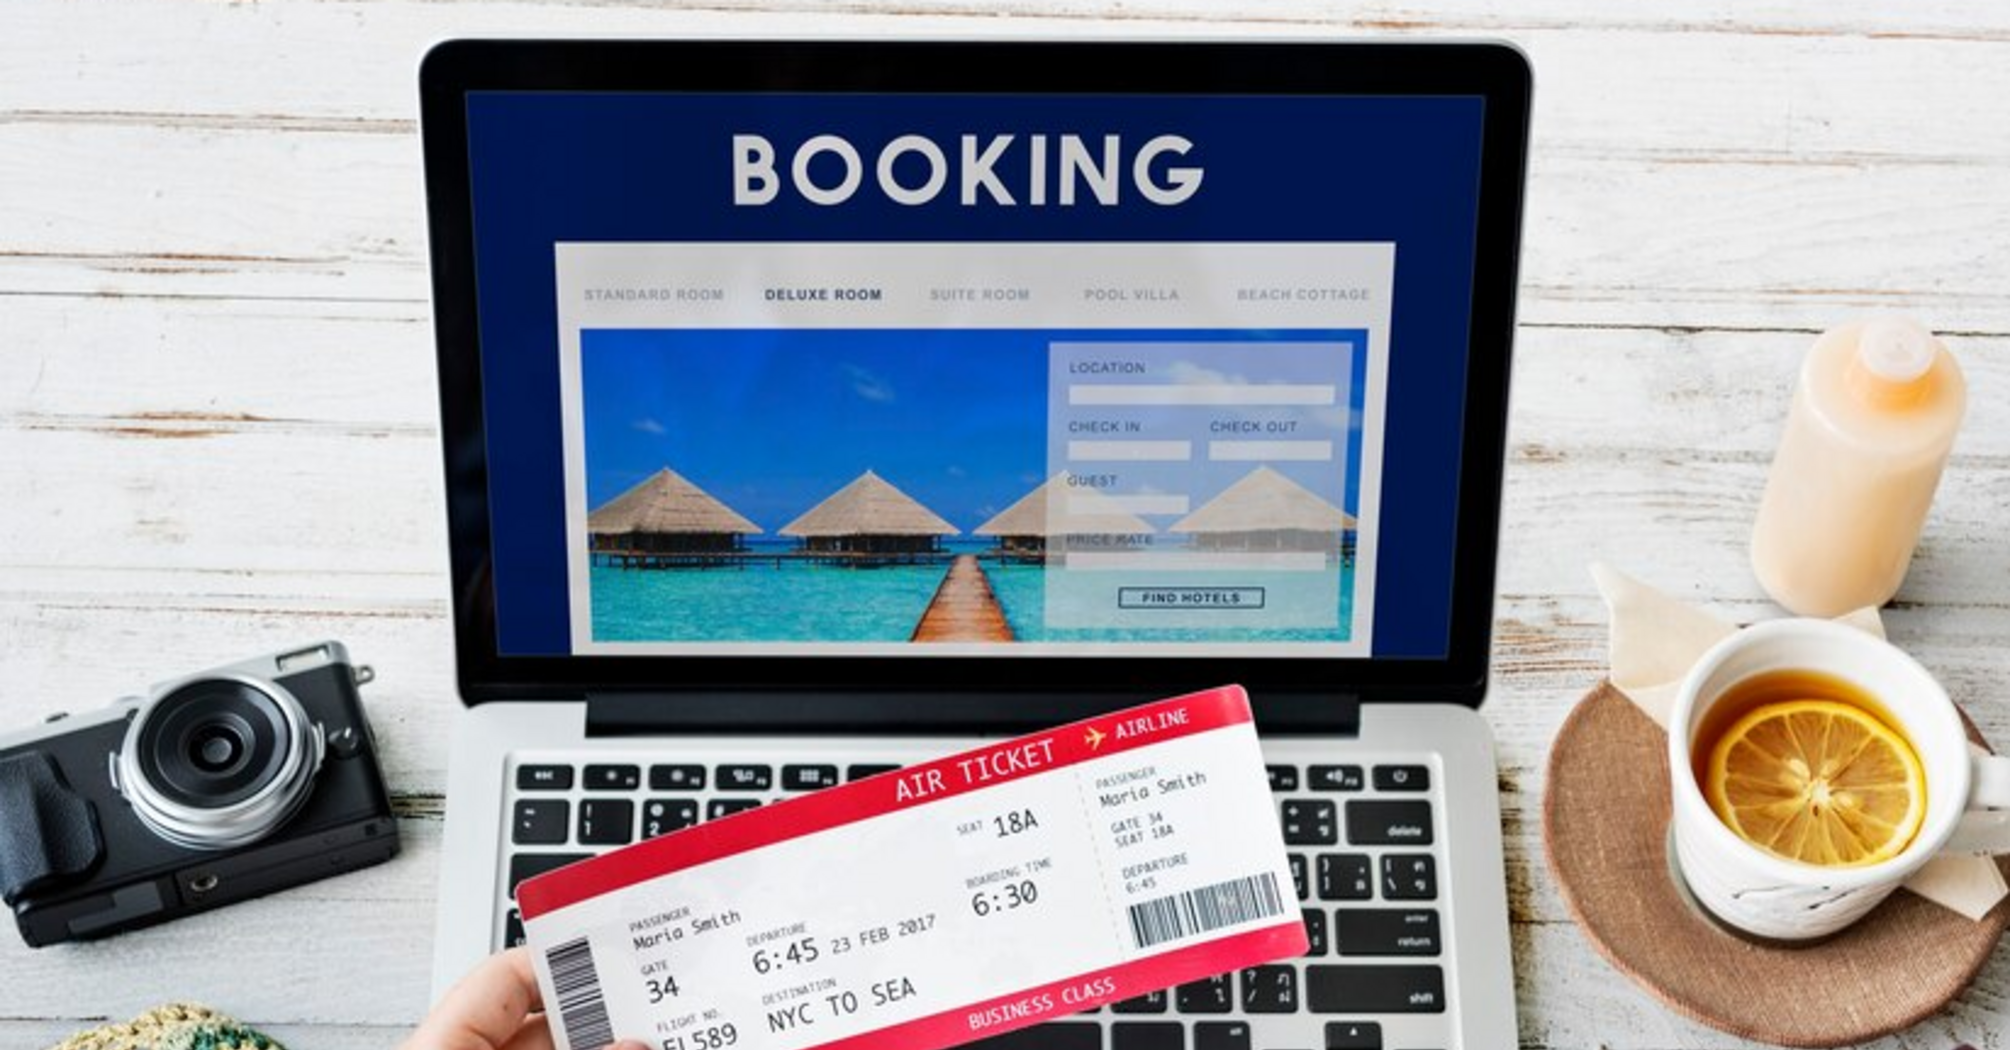 Digital transformation in the hotel business: tourists prefer online booking